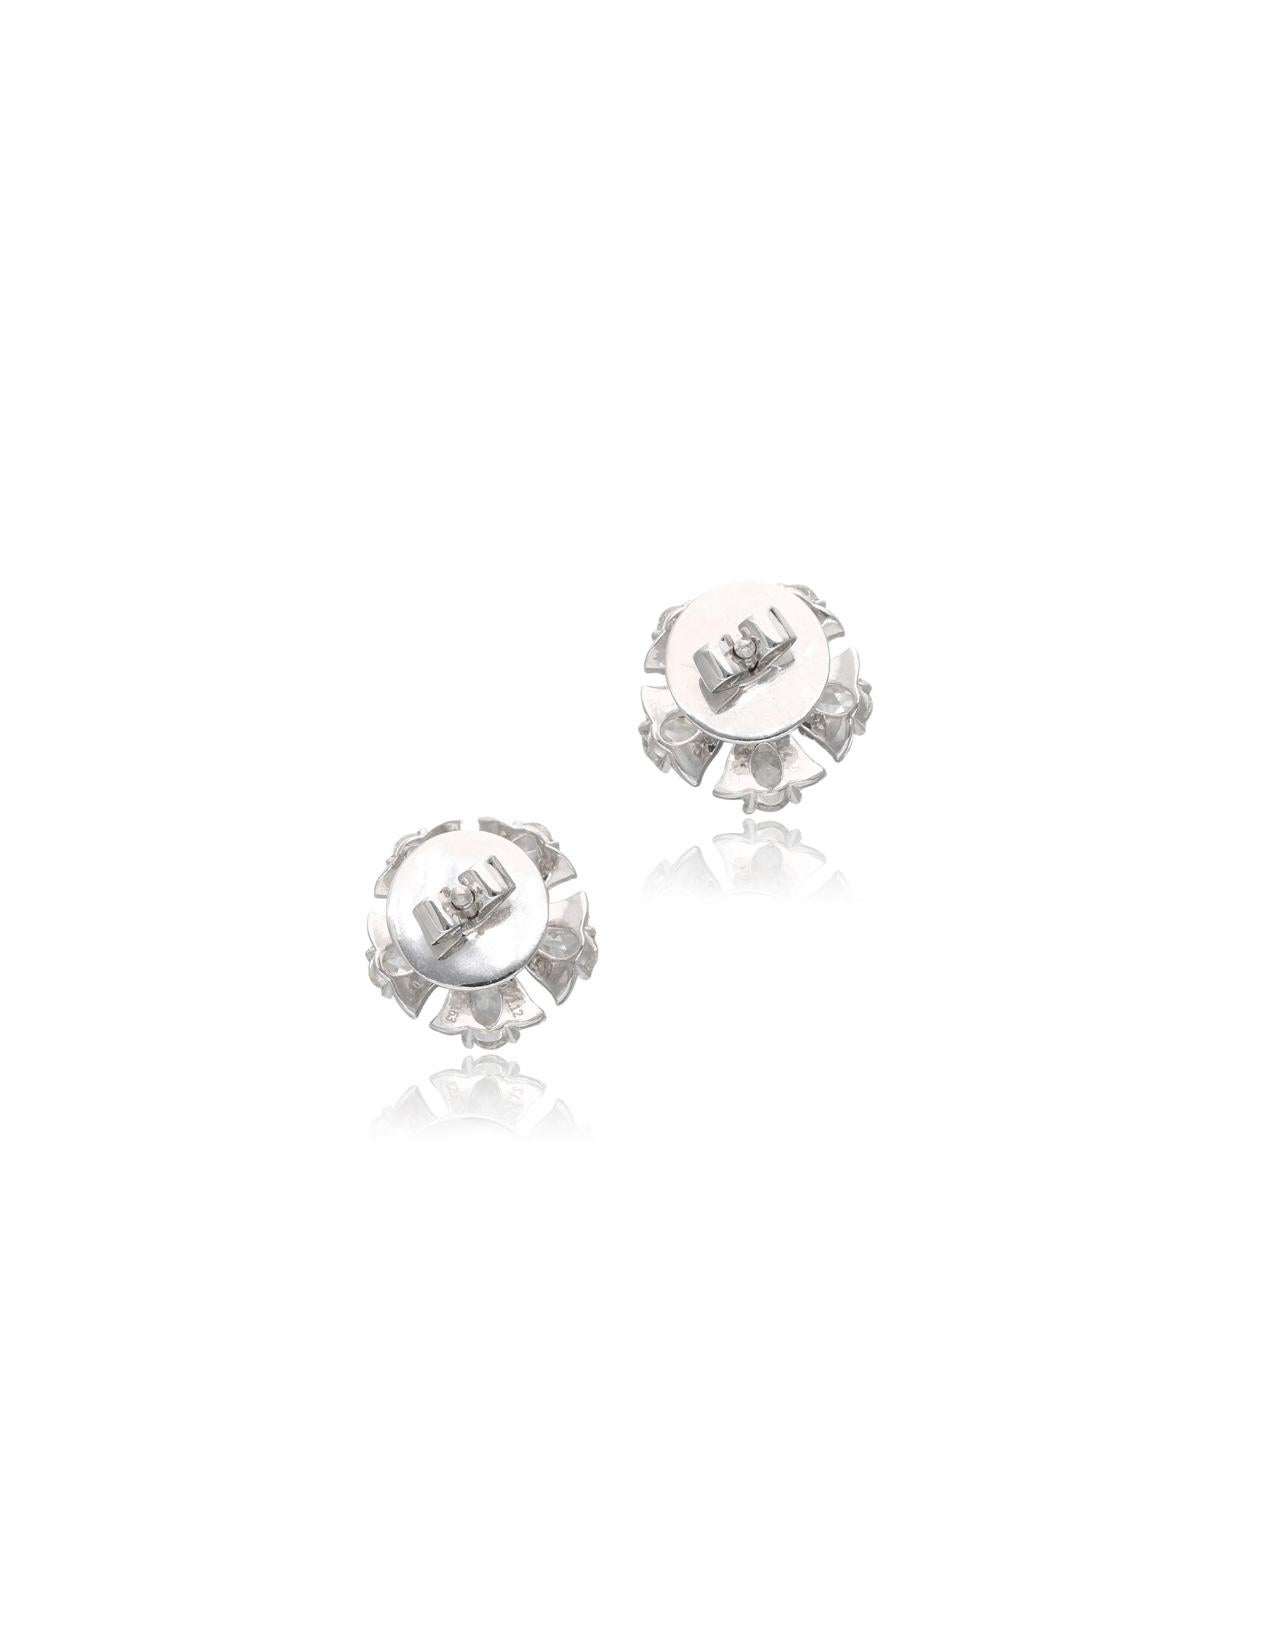 Rose Cut and Round Brilliant Diamond Stud Earrings in 18K Gold For Sale 3